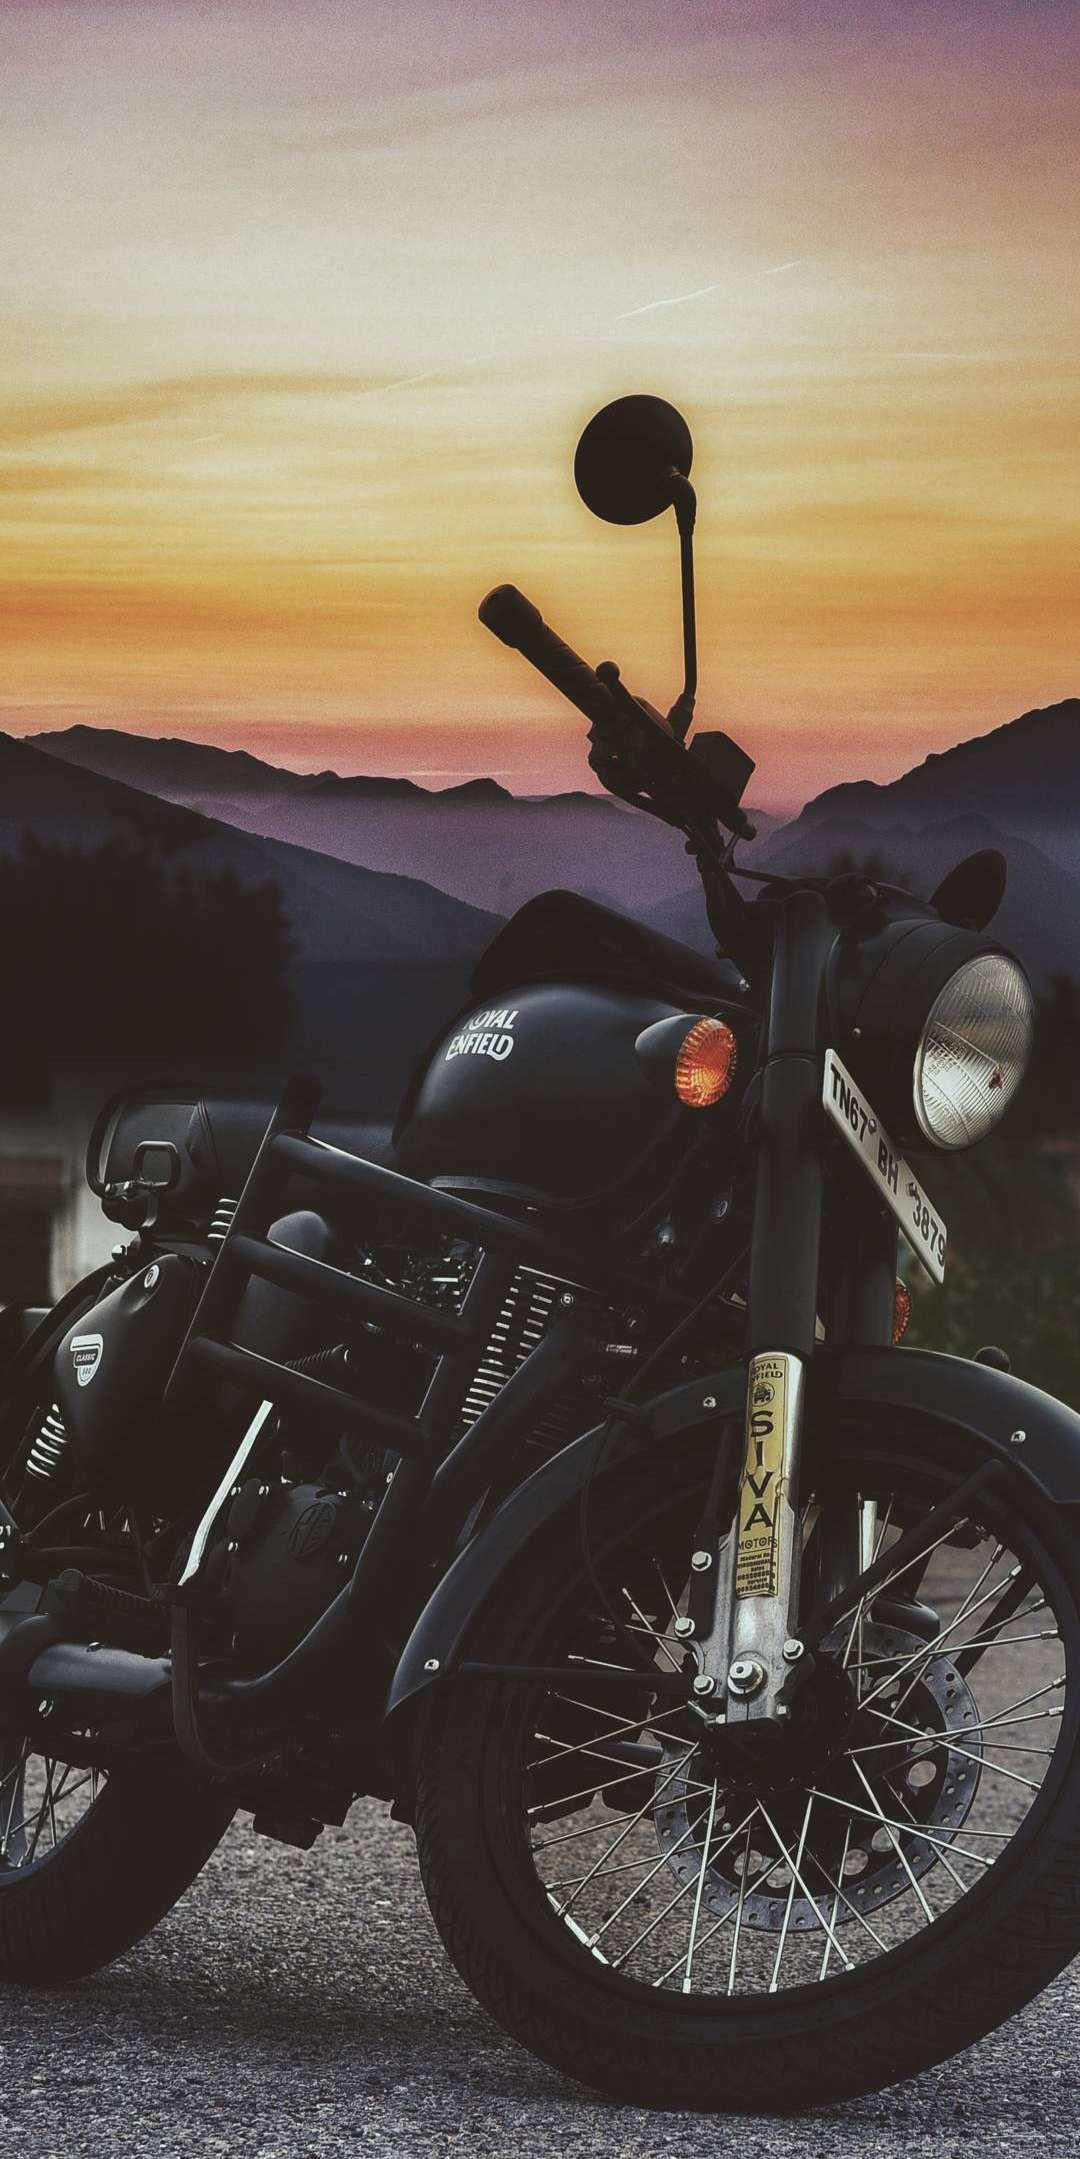 iPhone Wallpaper for iPhone iPhone 8 Plus, iPhone 6s, iPhone 6s Plus, iPhone. Royal enfield wallpaper, Royal enfield classic 350cc, Classic 350 royal enfield